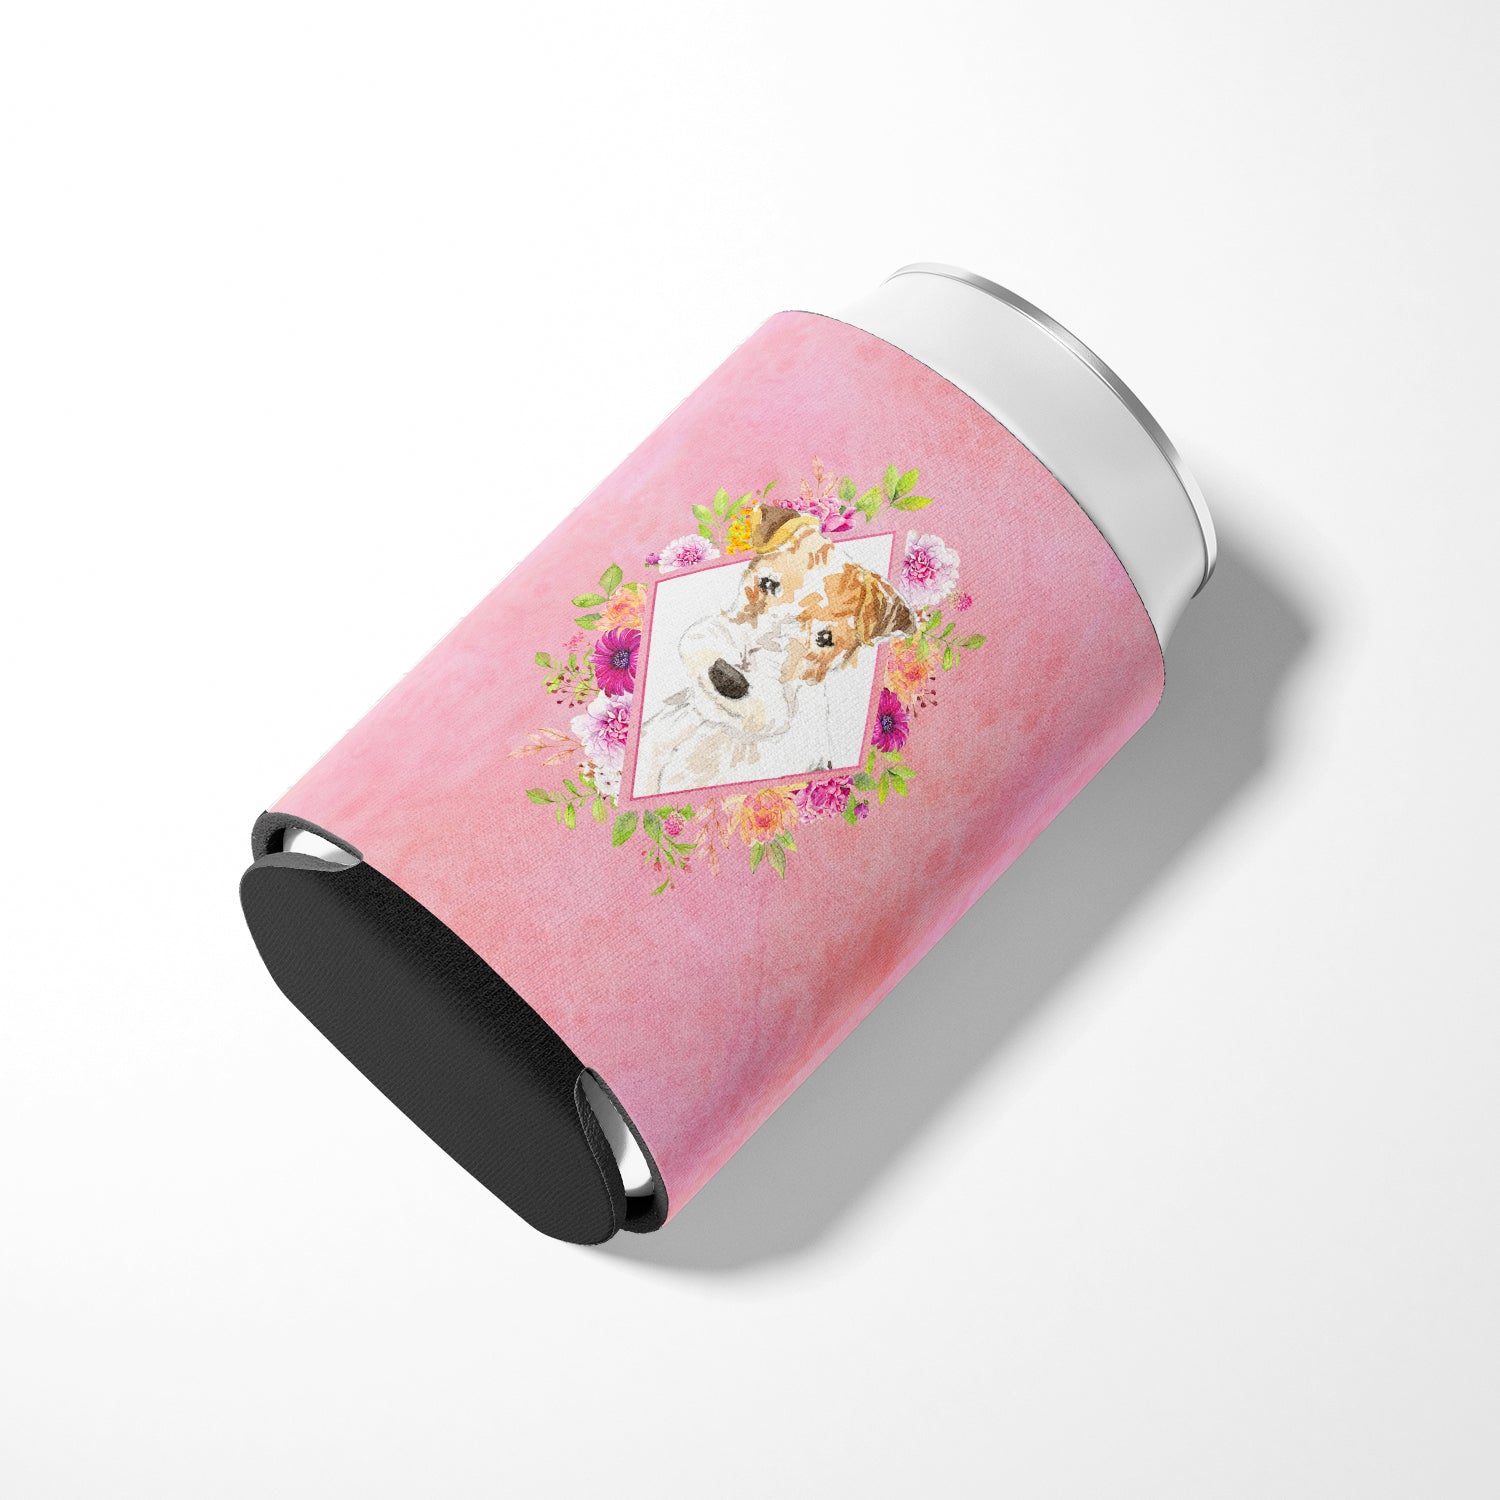 Fox Terrier Pink Flowers Can or Bottle Hugger CK4199CC  the-store.com.